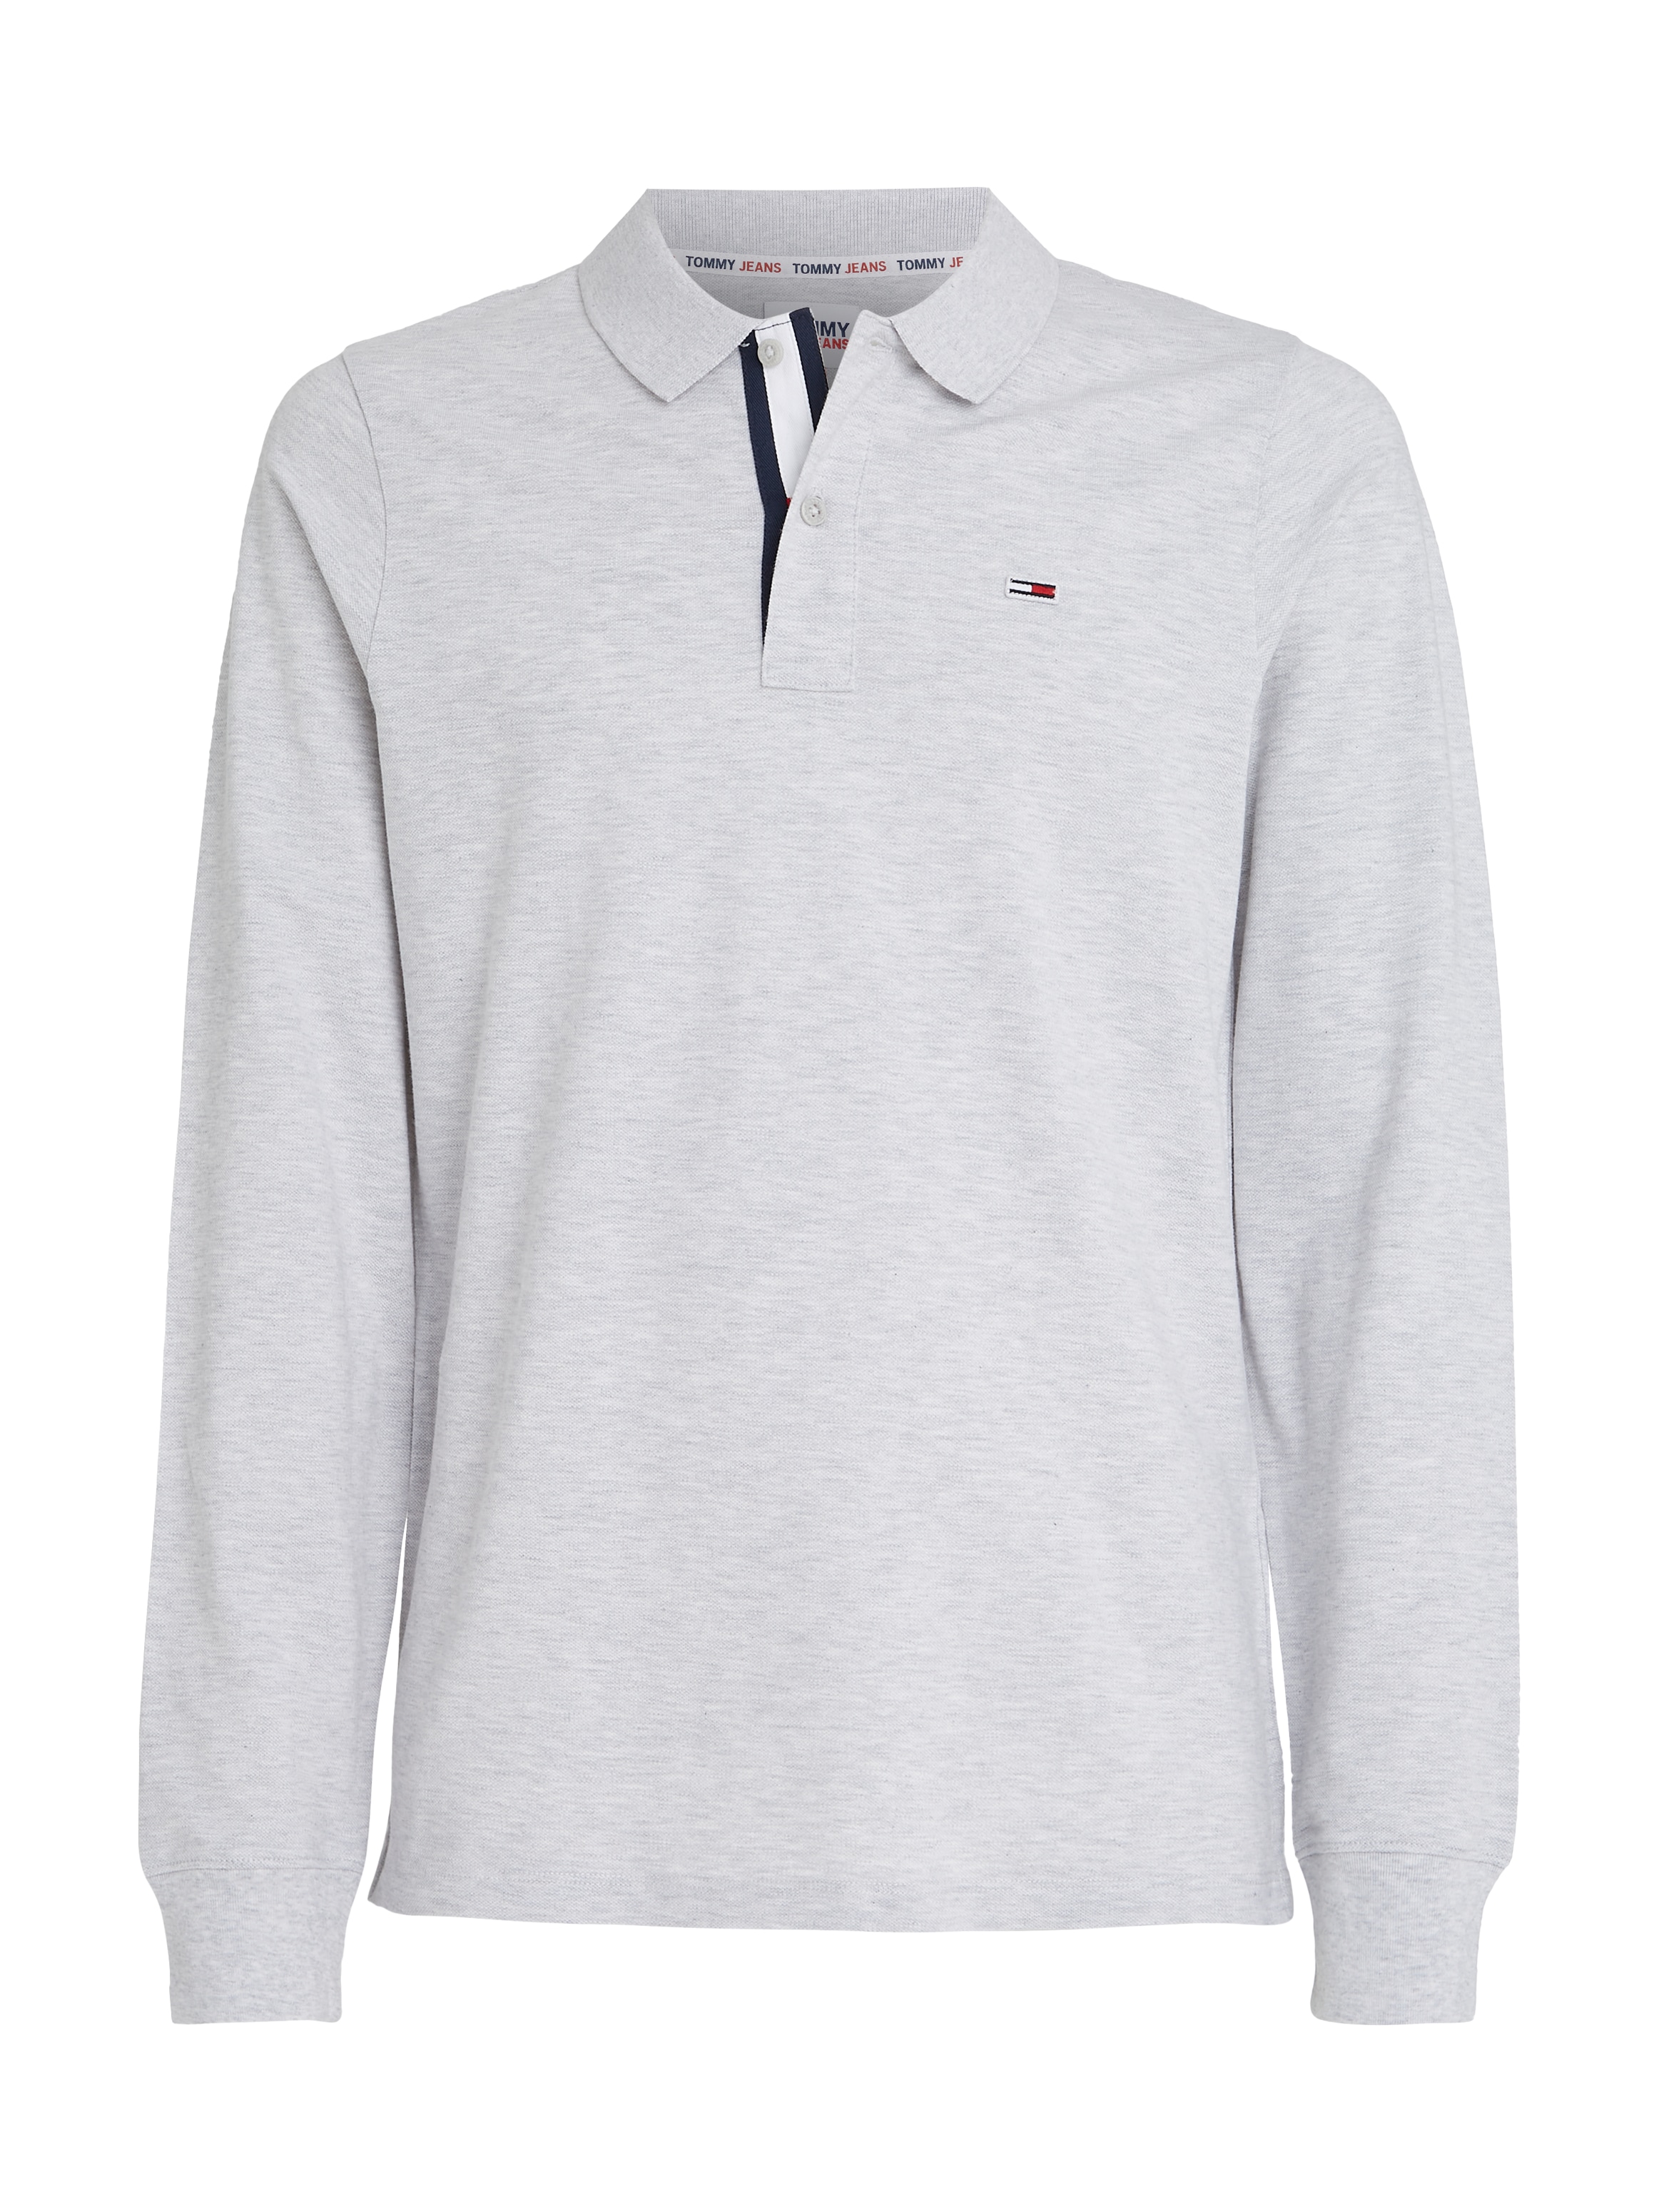 LS Tommy online Langarm-Poloshirt SOLID bei SLIM POLO« »TJM Jeans